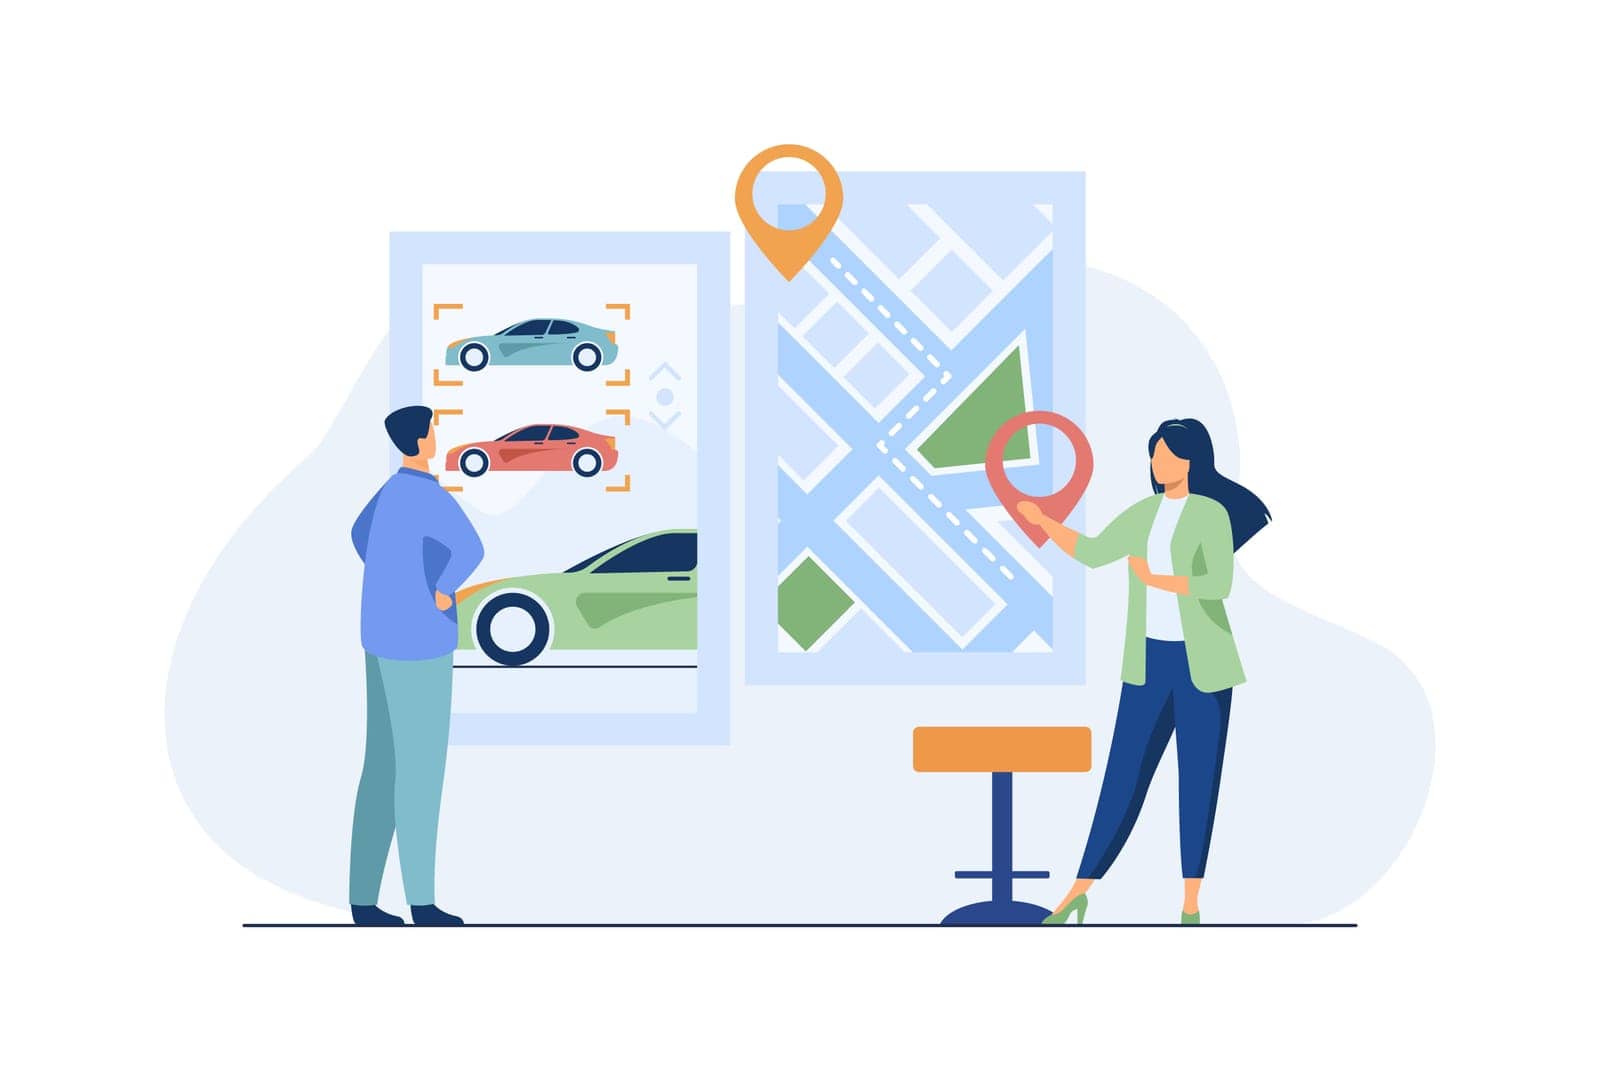 Man renting car. Car sharing app, city map with pointers. consultant flat vector illustration. Transportation, urban transport concept for banner, website design or landing web page